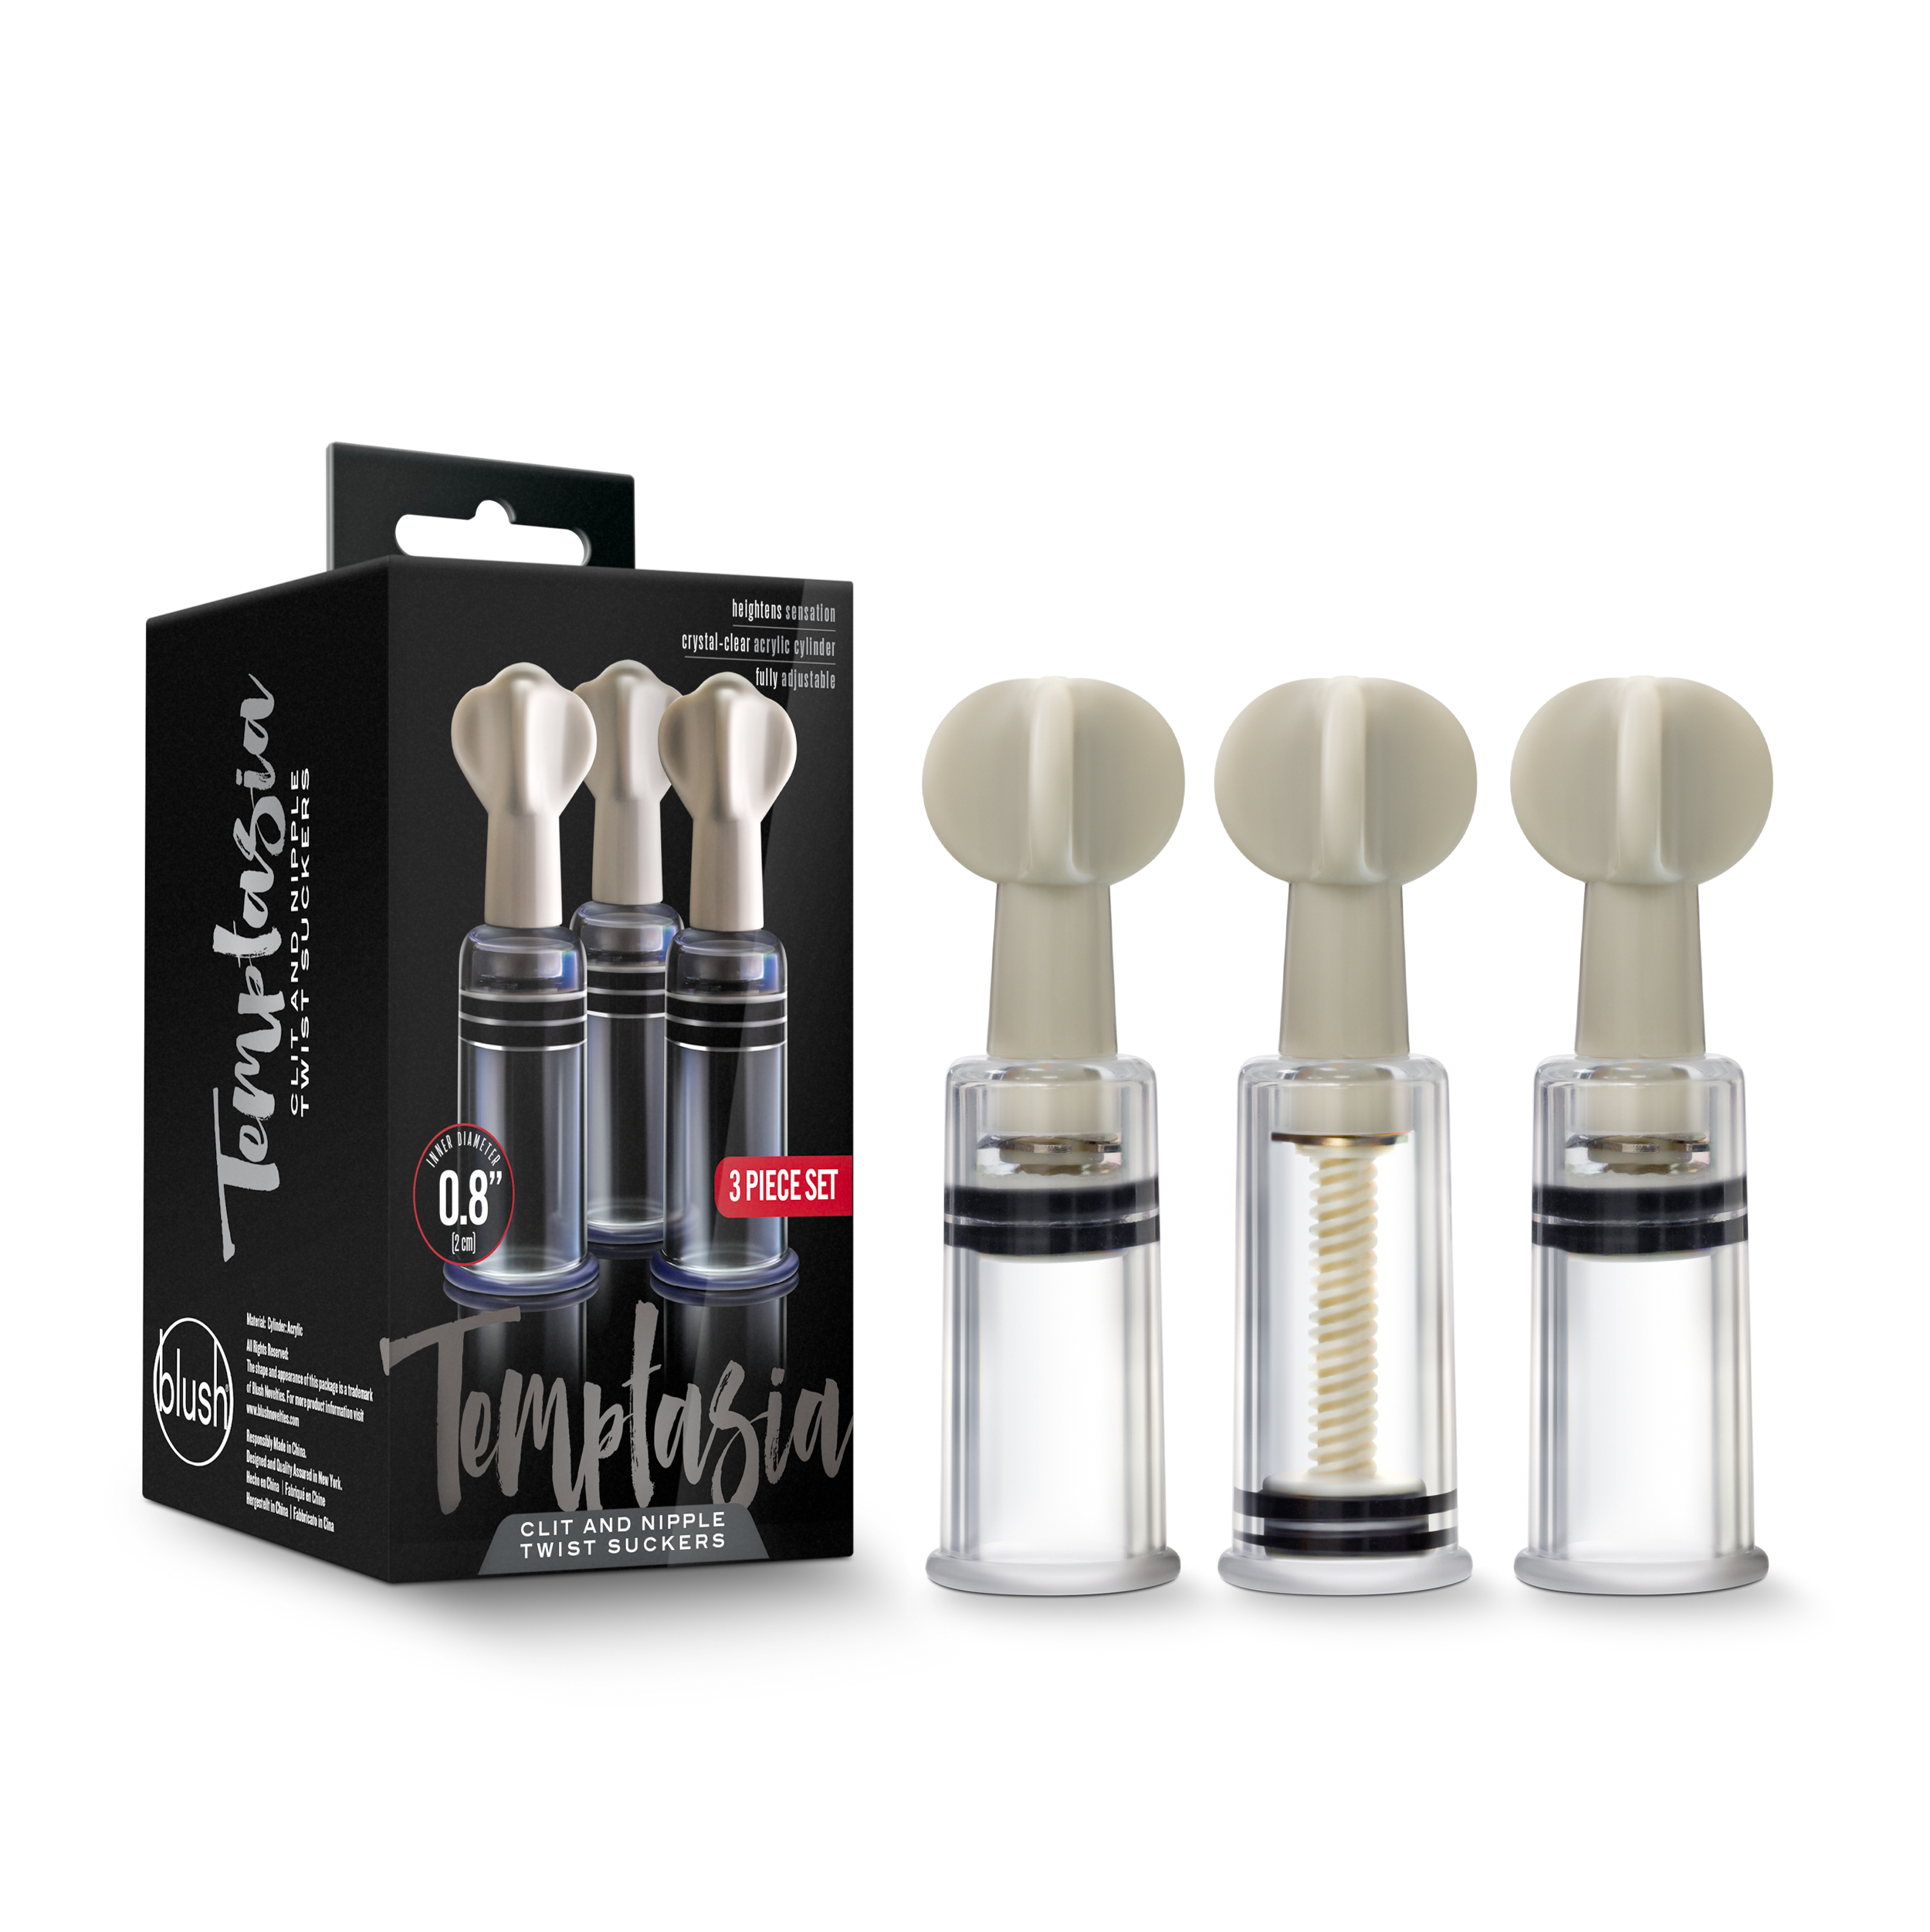 temptasia clit and nipple twist suckers set of  clear 